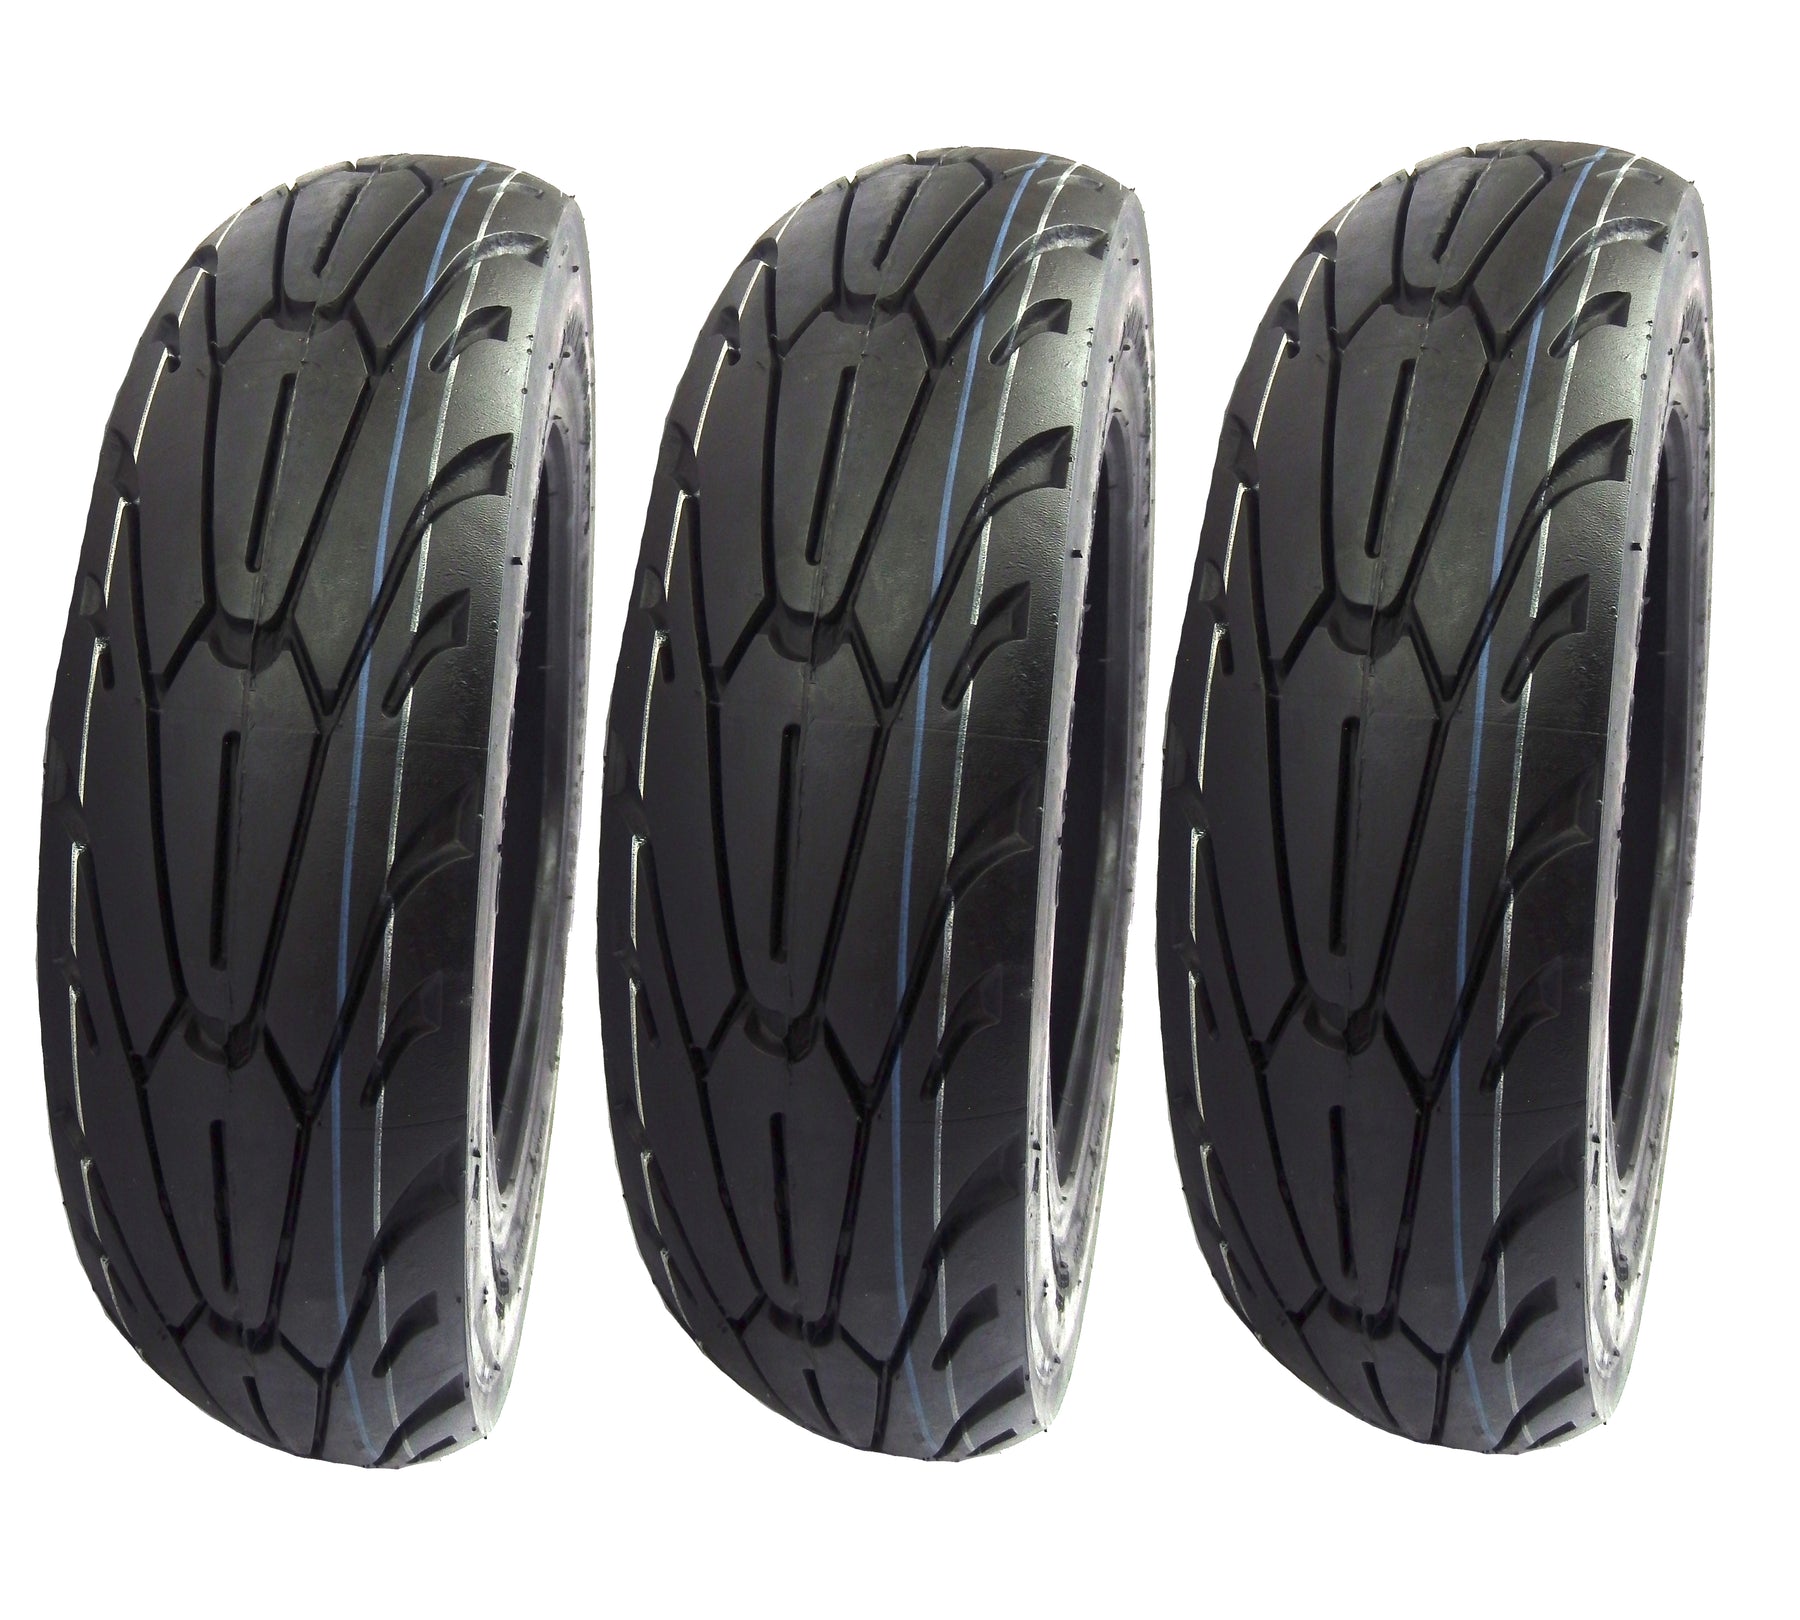 Tyre SIP Performer 350 X 10  * Buy 3 Special Offer *